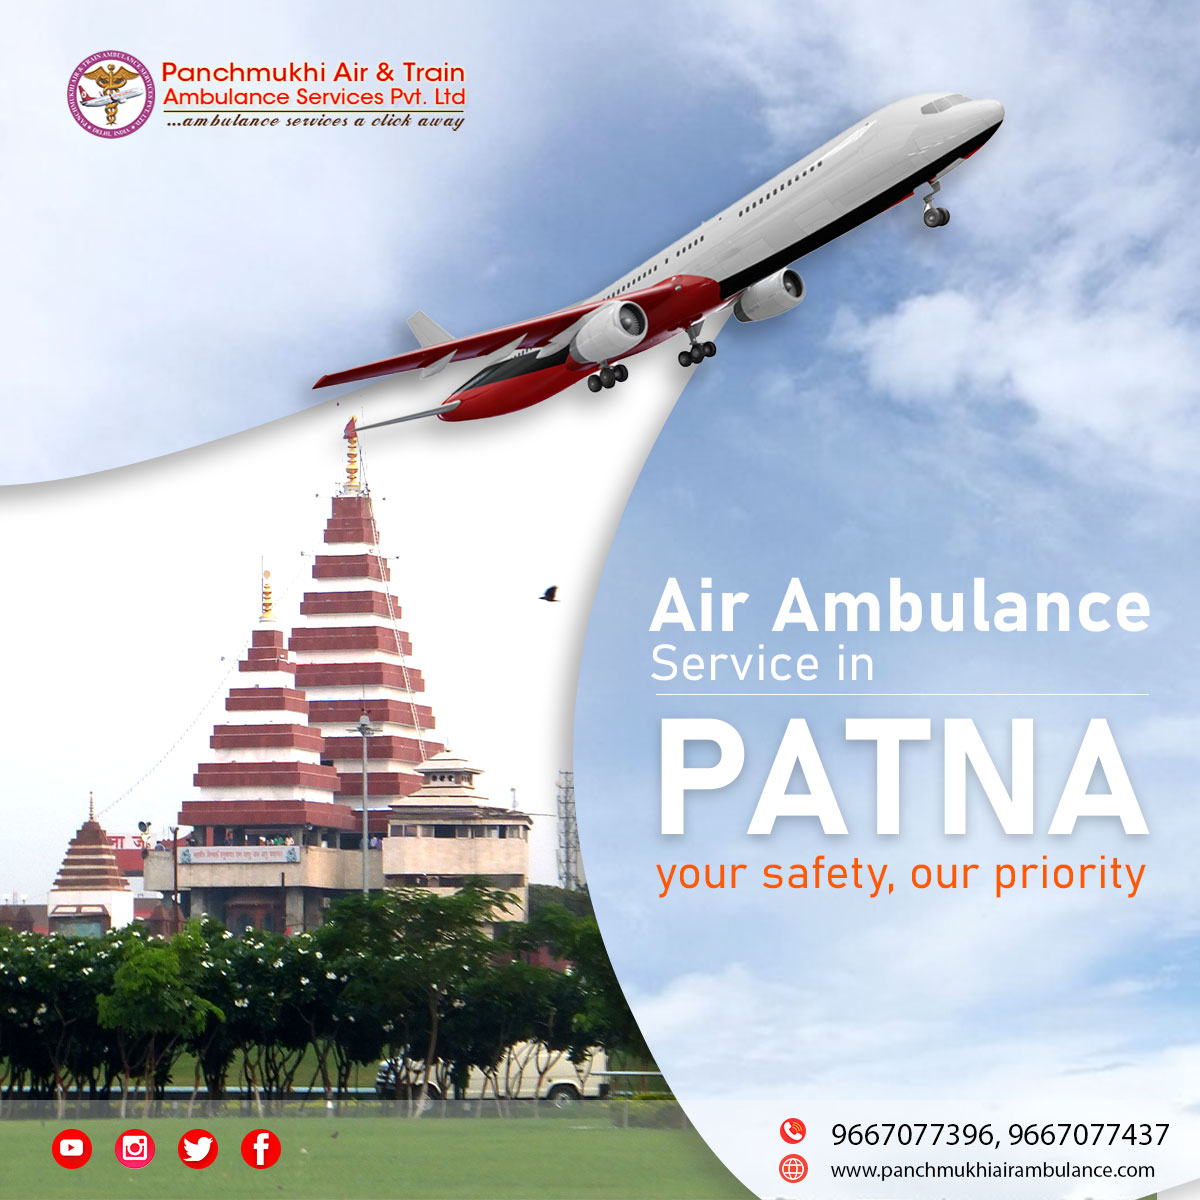 New Charter Air Ambulance Services in Patna